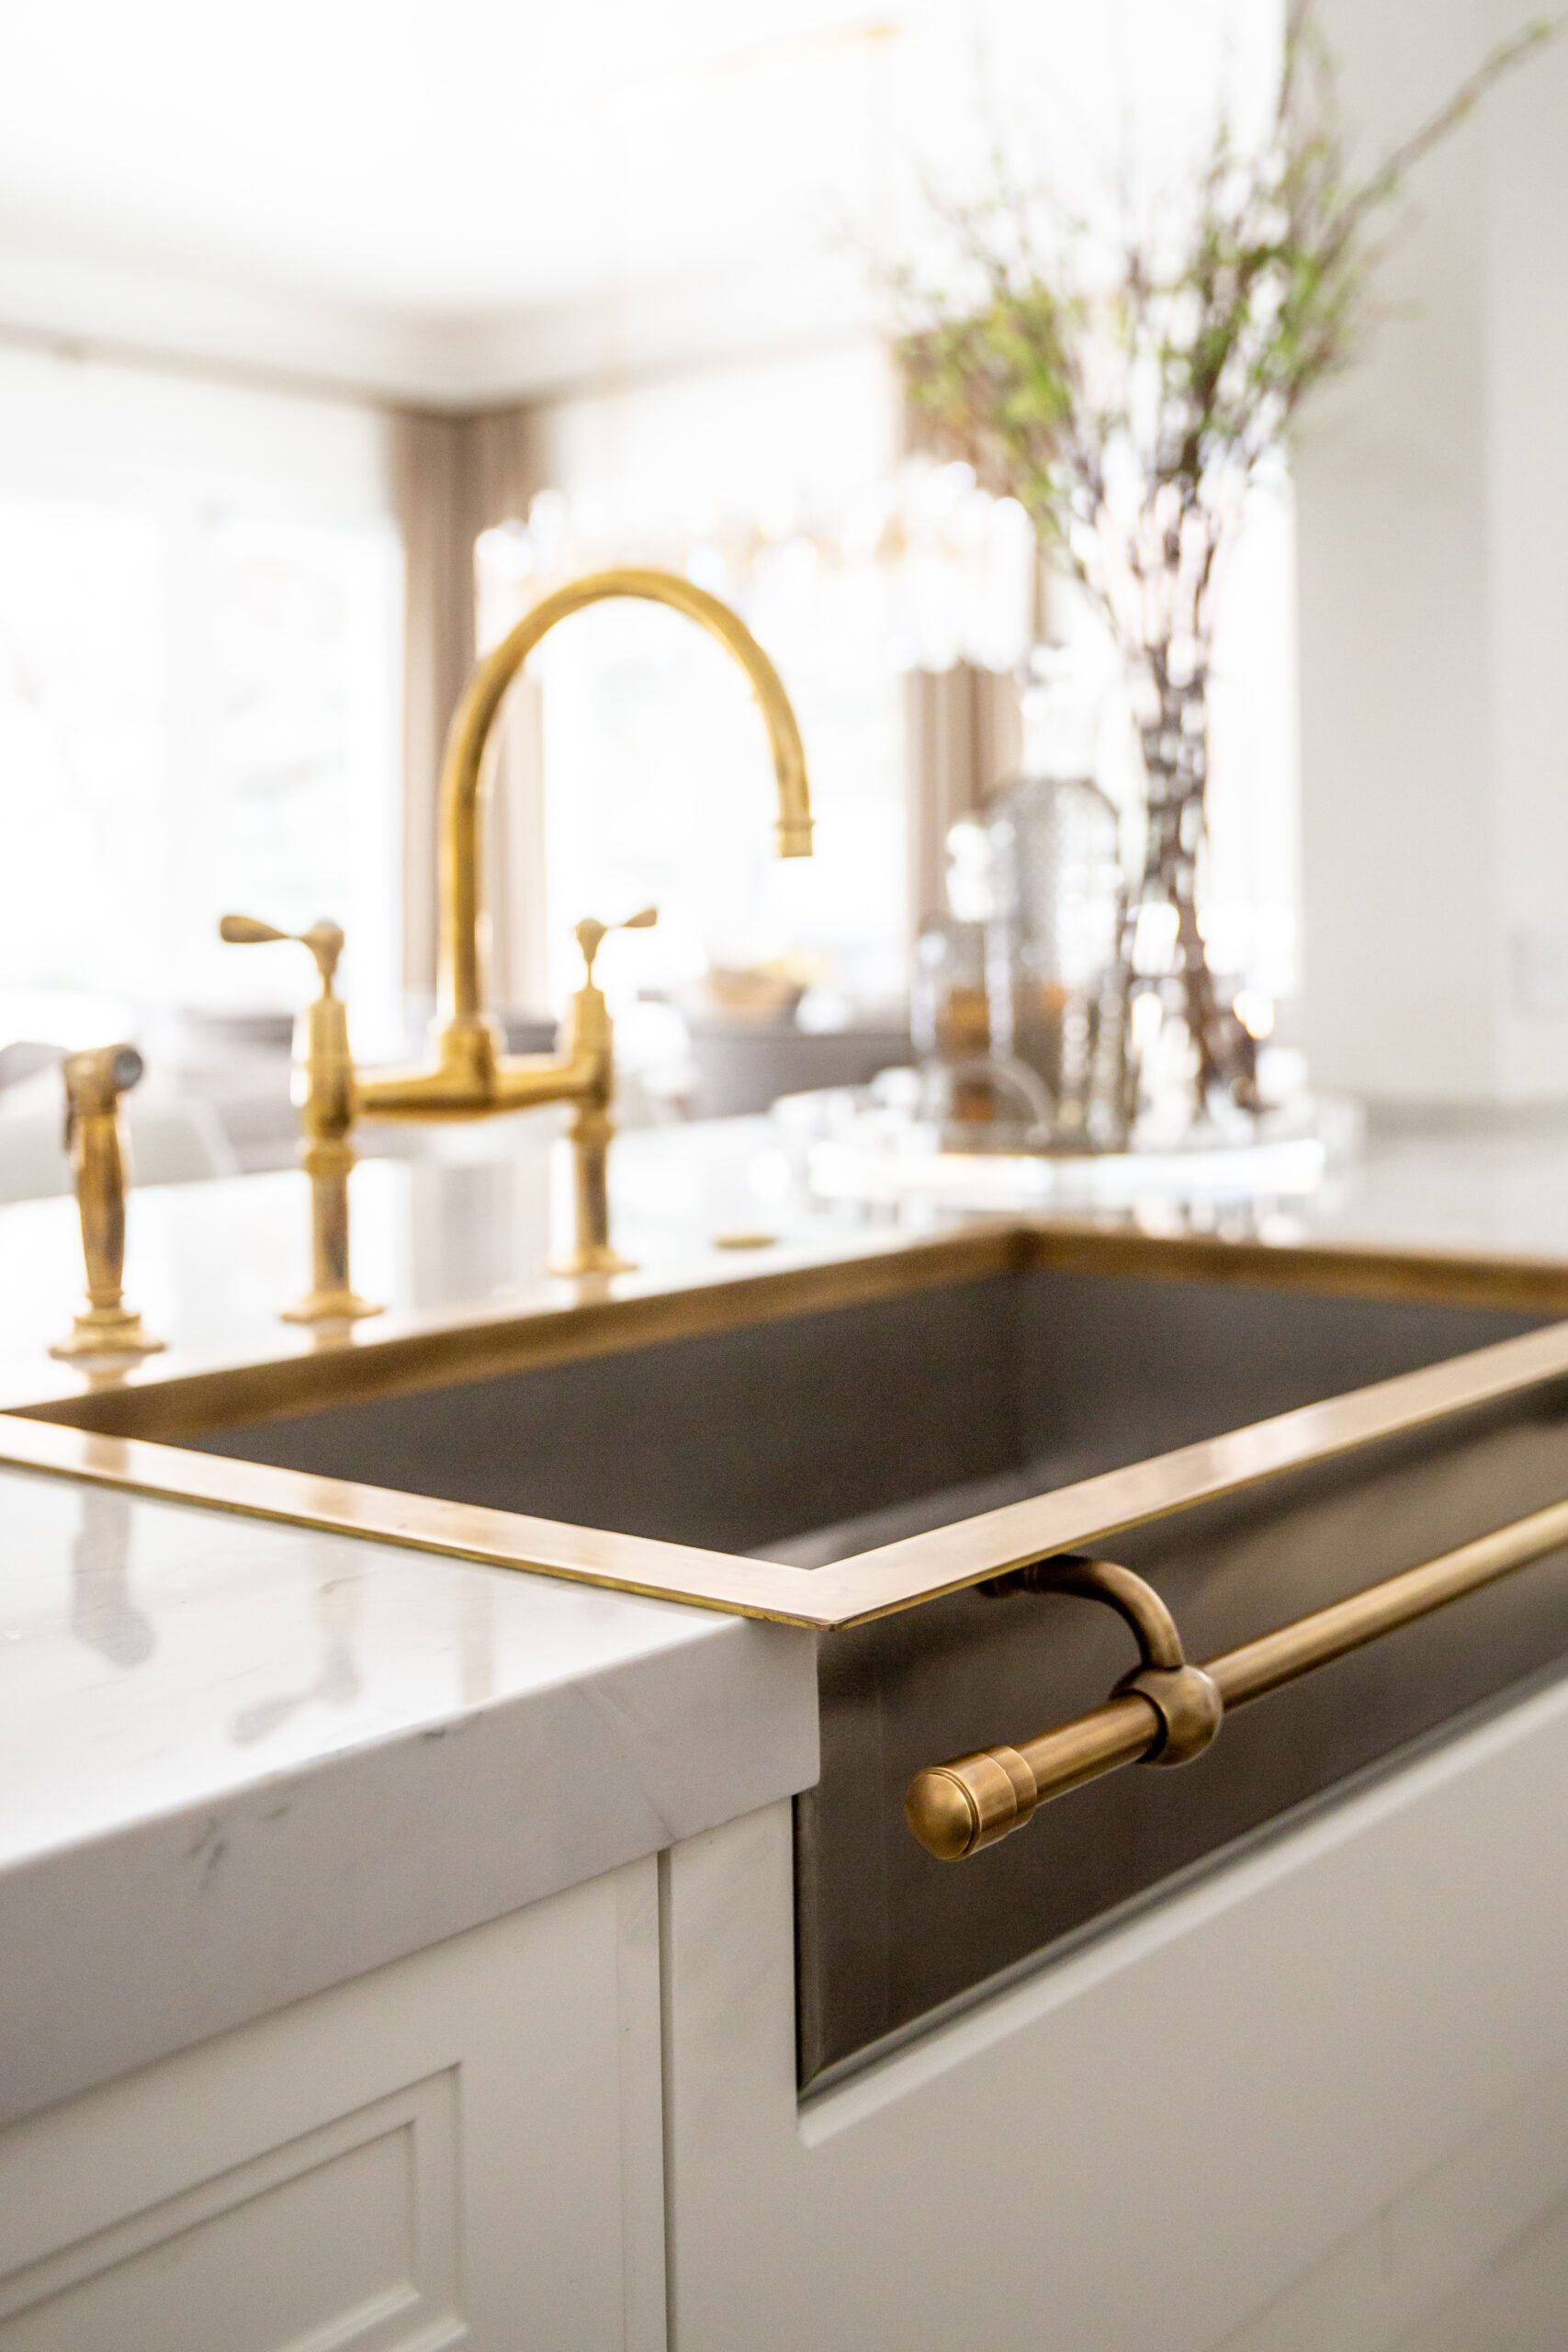 The Latest Trends in Kitchen Sinks